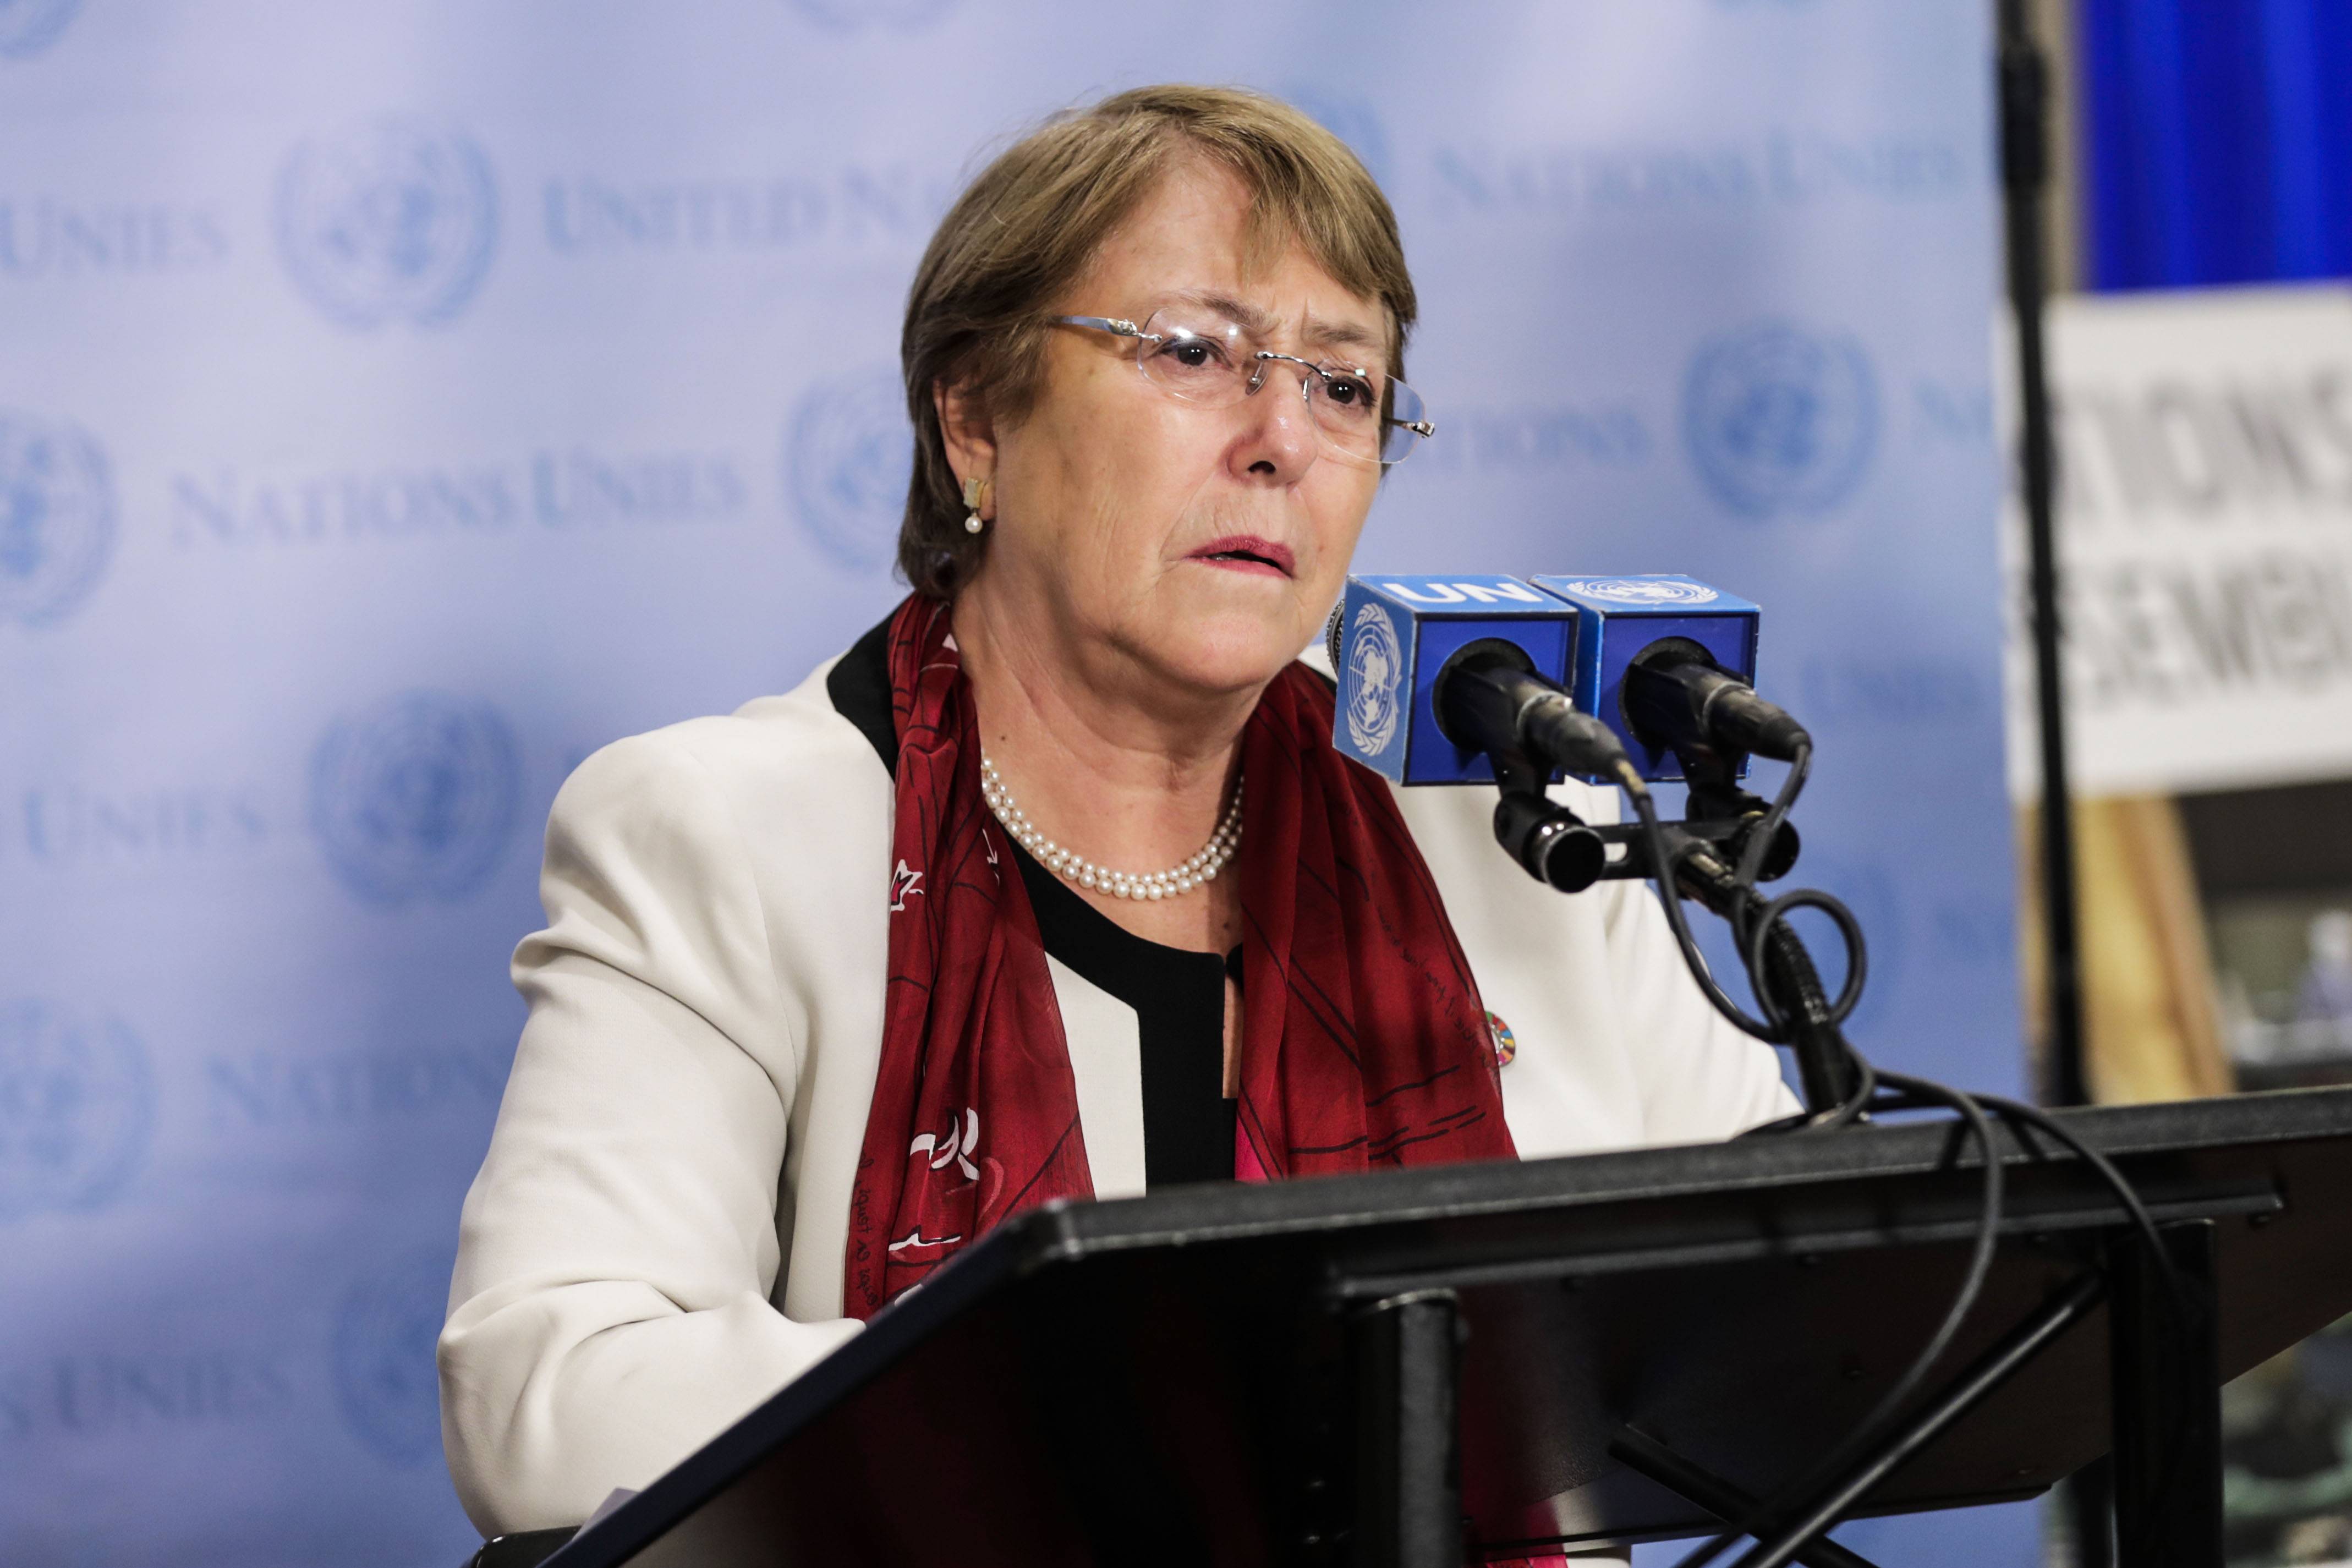 United Nations, New York, USA, September 26, 2018 - Michelle Bachelet, United Nations High Commissioner for Human Rights, briefs journalists today at the UN Headquarters in New York City.
(Photo by Luiz Rampelotto/NurPhoto via Getty Images)